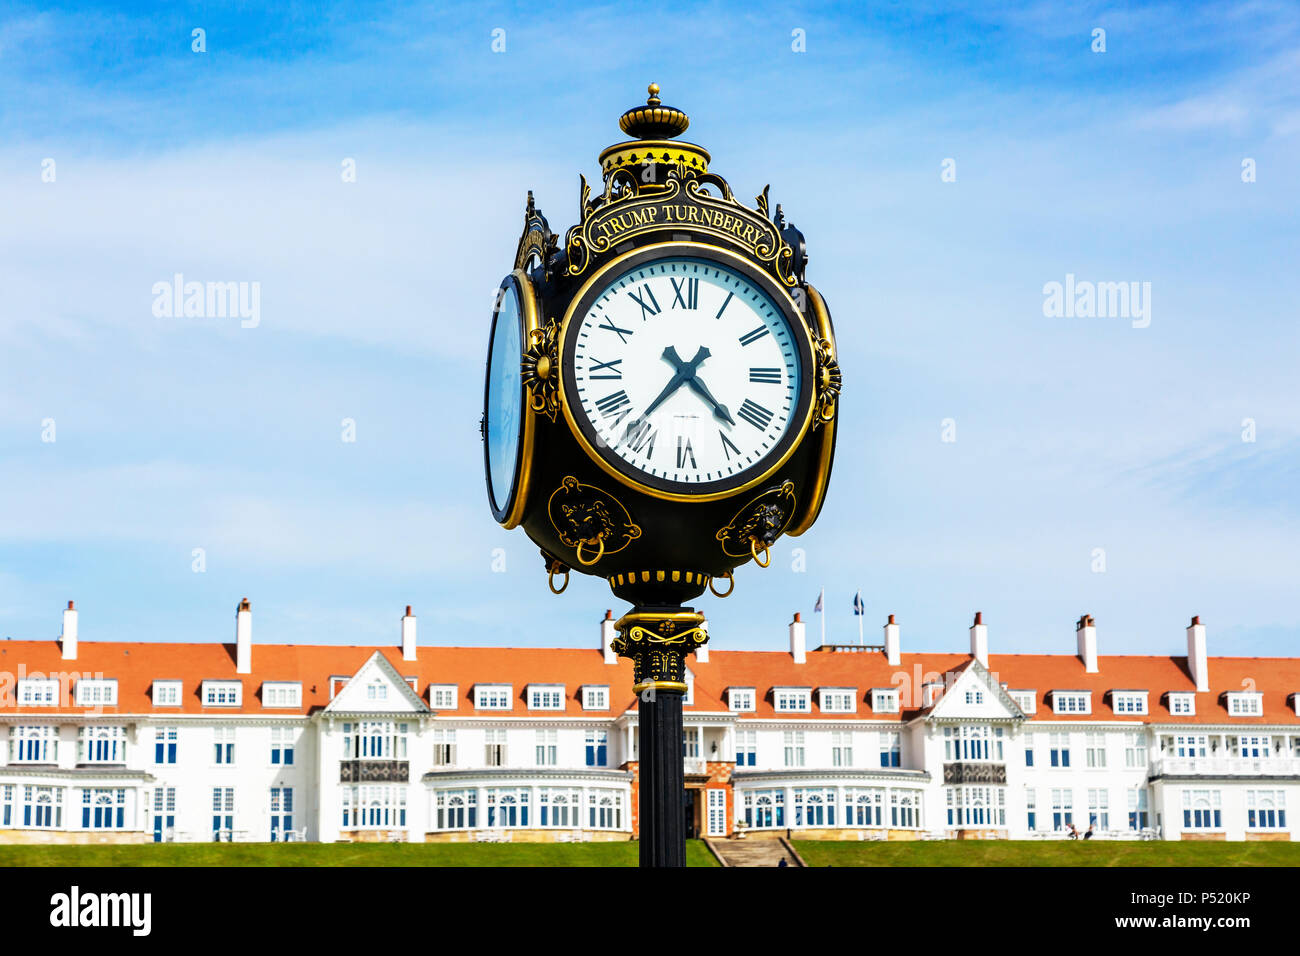 Ornate clock outside the Trump Turnberry hotel and Golf complex, Turnberry, Ayrshire, Scotland Stock Photo